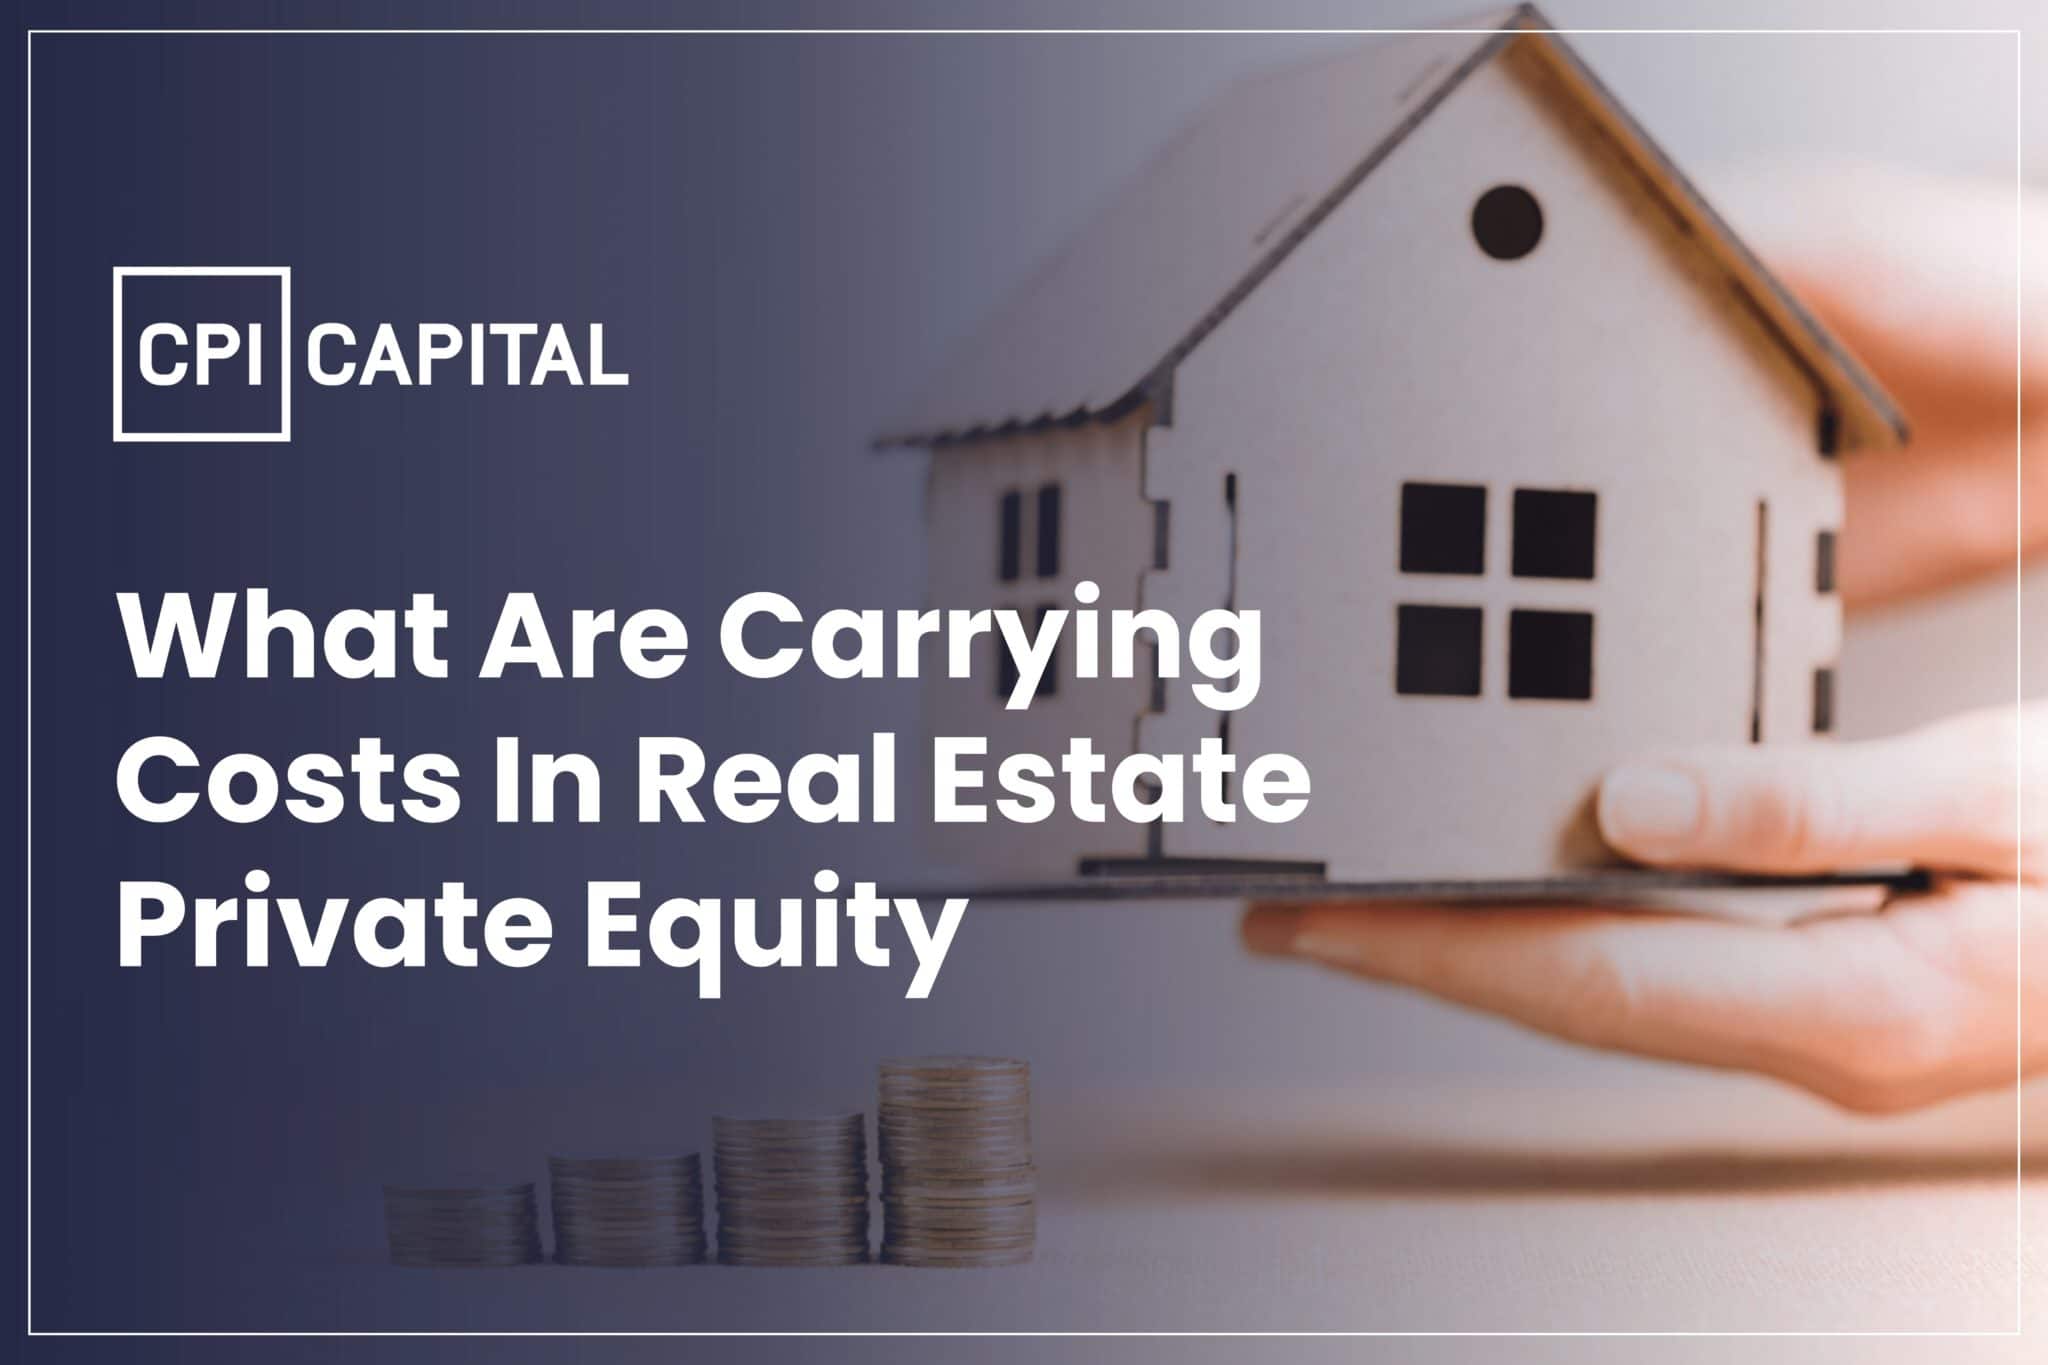 What are Carrying Costs in Real Estate Private Equity?